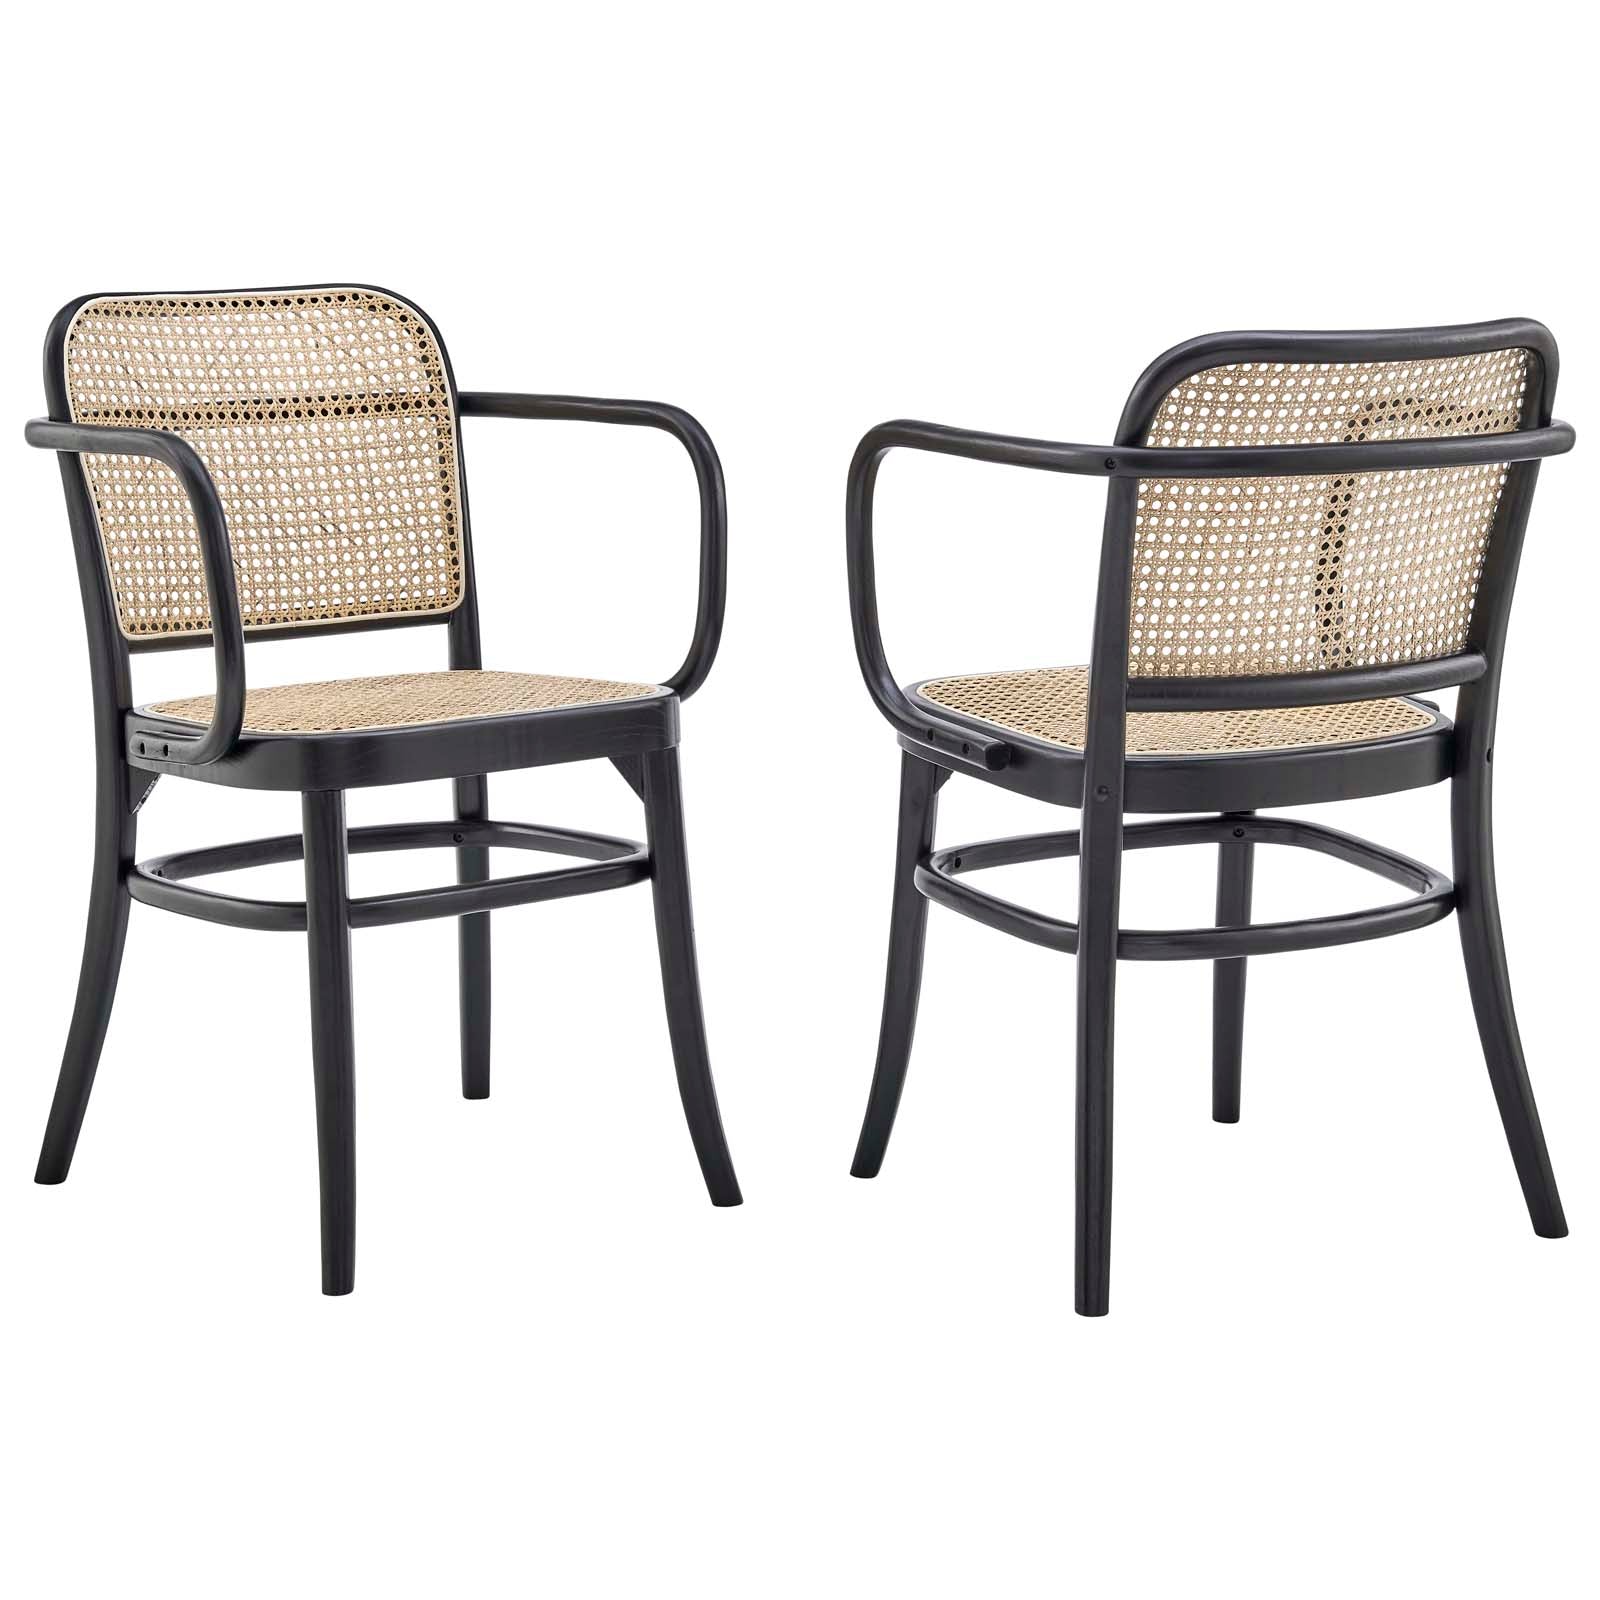 Modway Dining Chairs - Winona Wood Dining Chair Set Of 2 Black